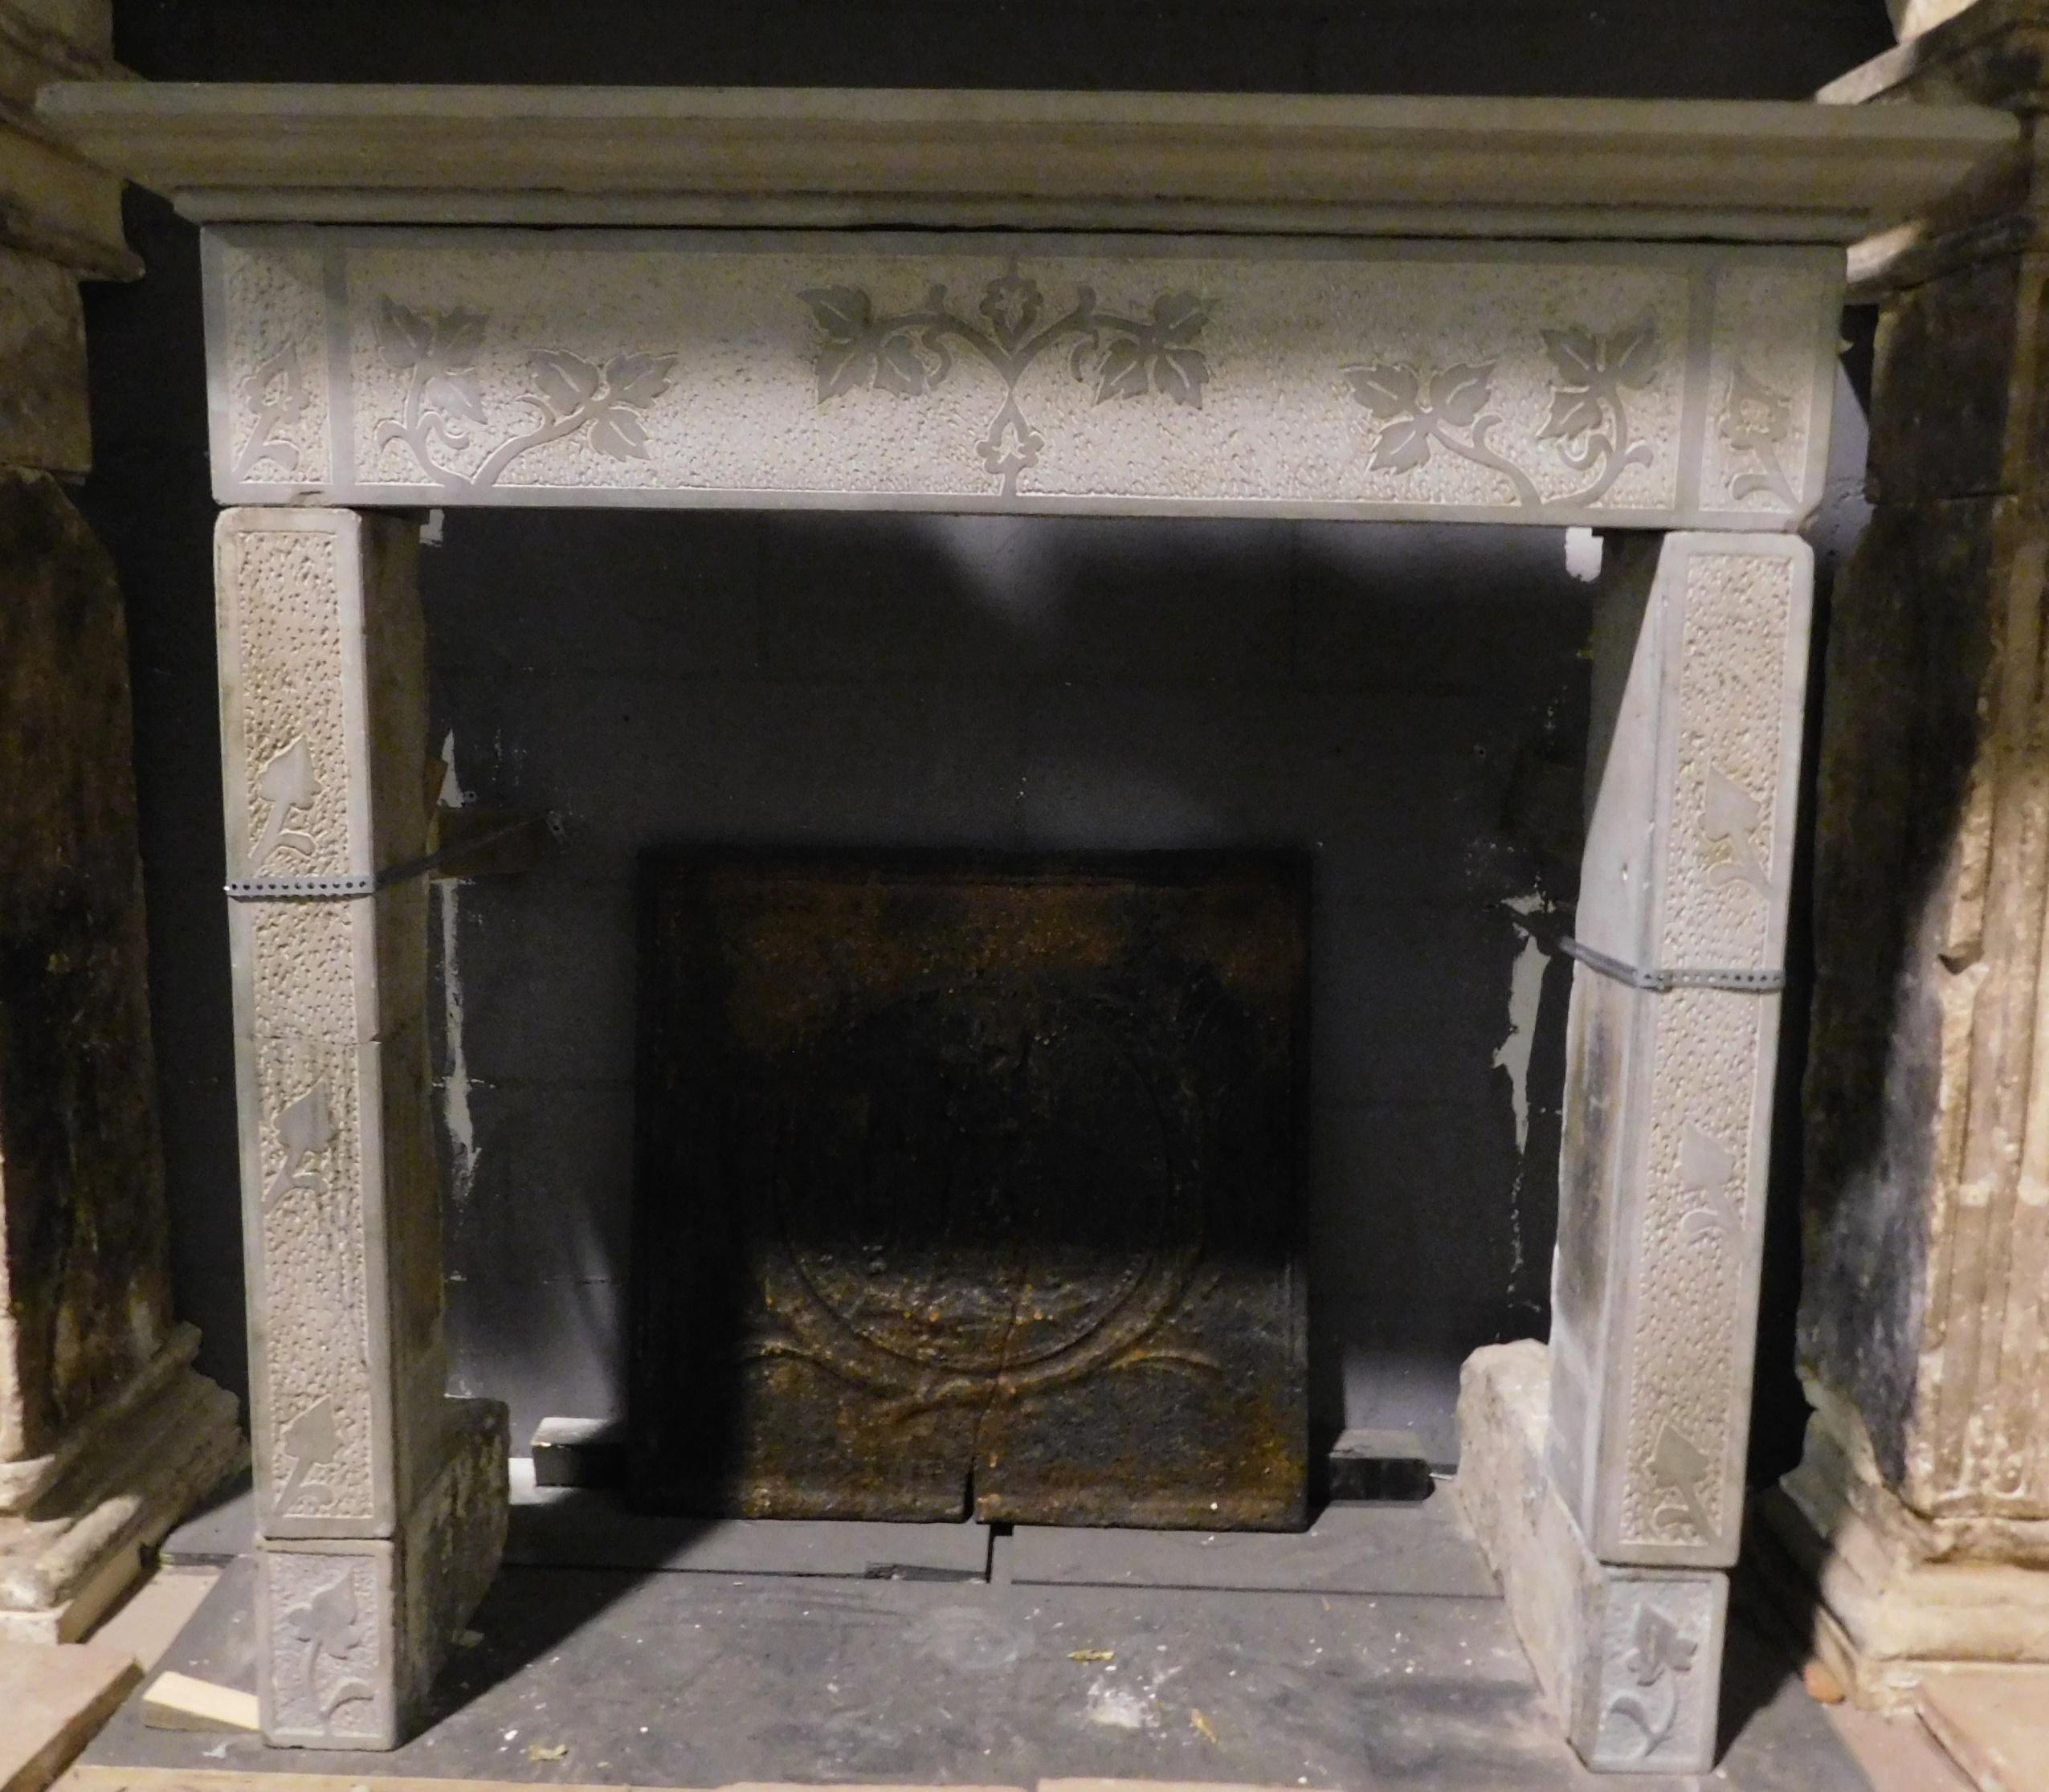 Antique gray stone fireplace mantle, carved in bas-relief with plant shapes and leaves, built and hand-sculpted in the late 1700s for a palace in central Italy.
Beautiful fireplace mantle, ideal both in rustic contexts for stone and in more modern